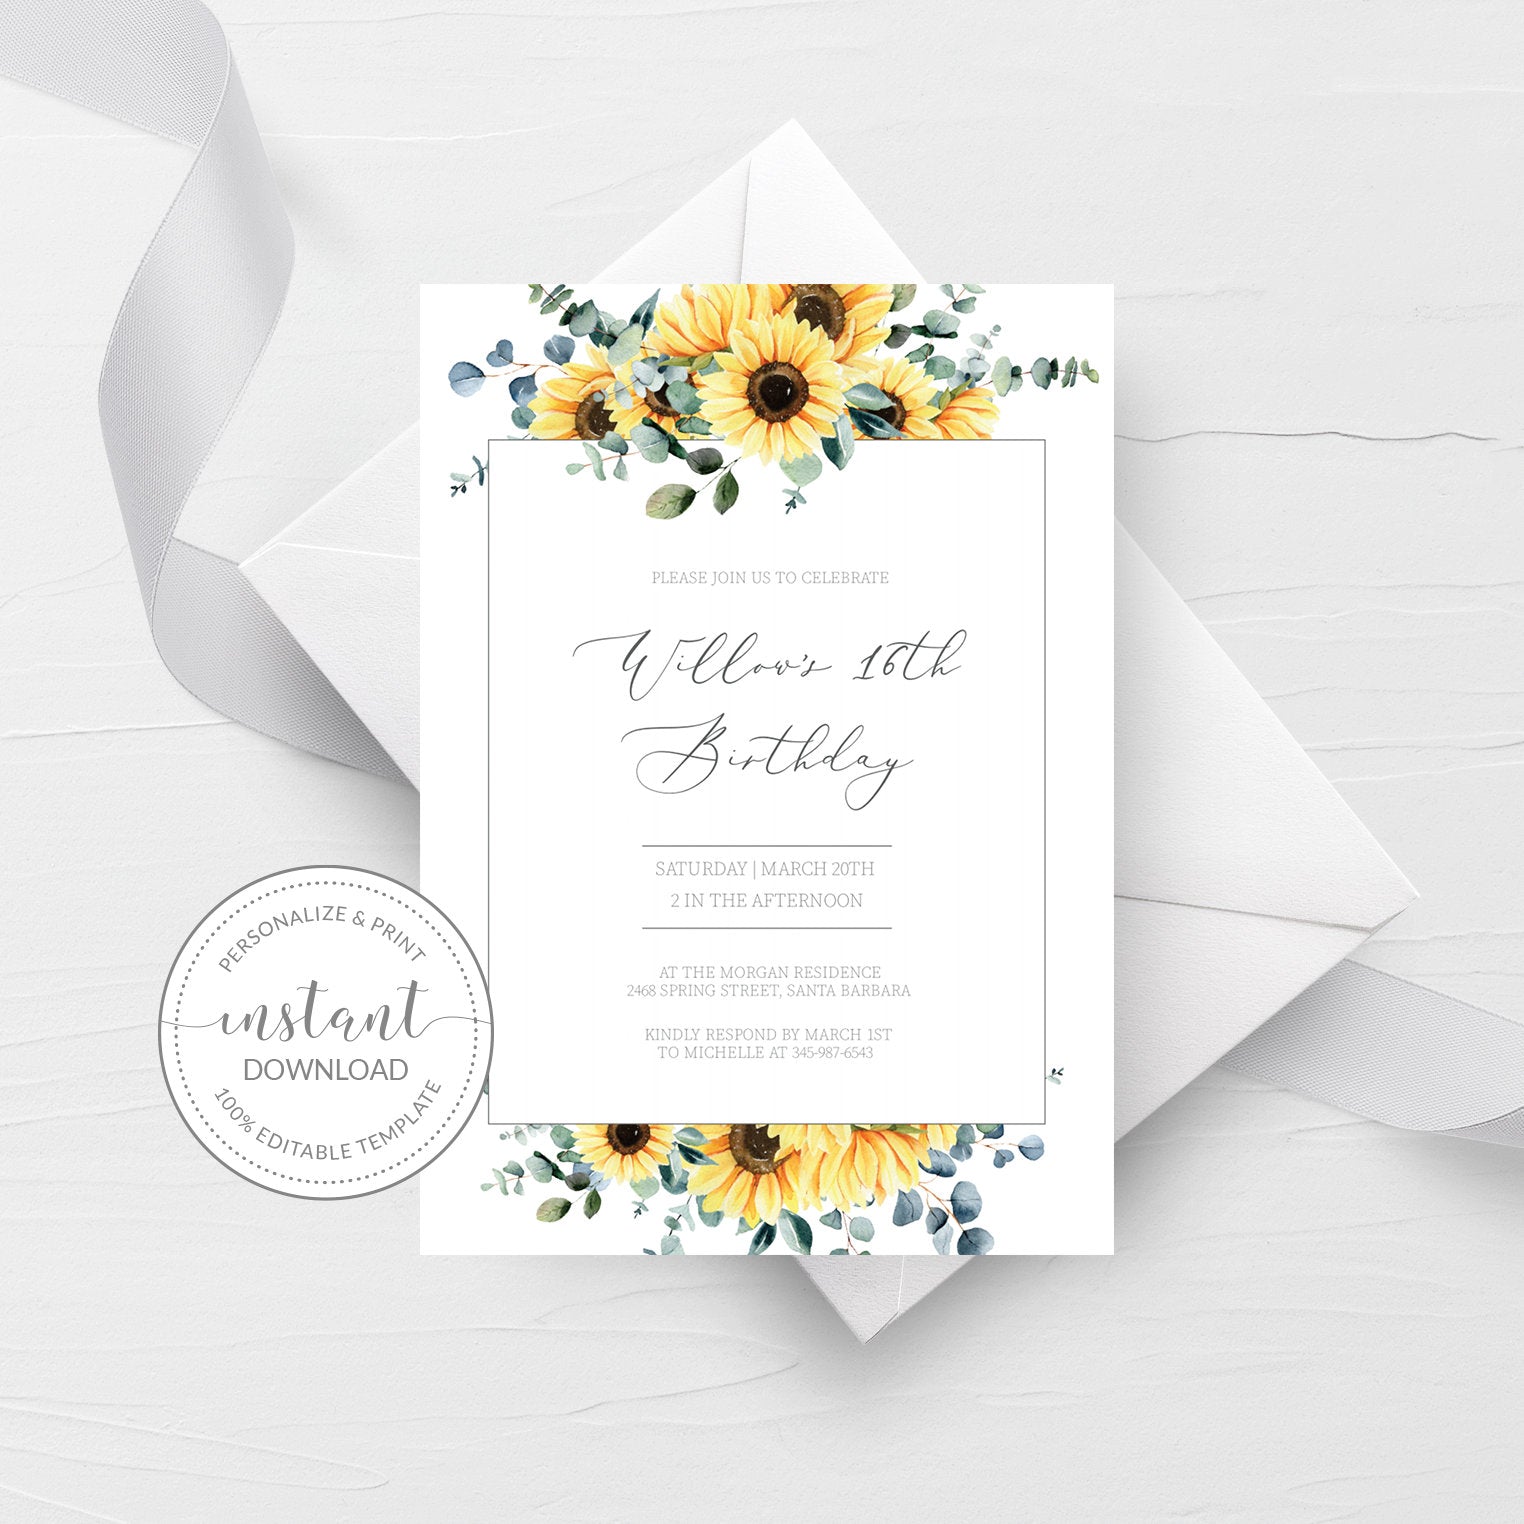 Sunflower Birthday Party Invitation Template, Printable, Editable INSTANT DOWNLOAD - S100